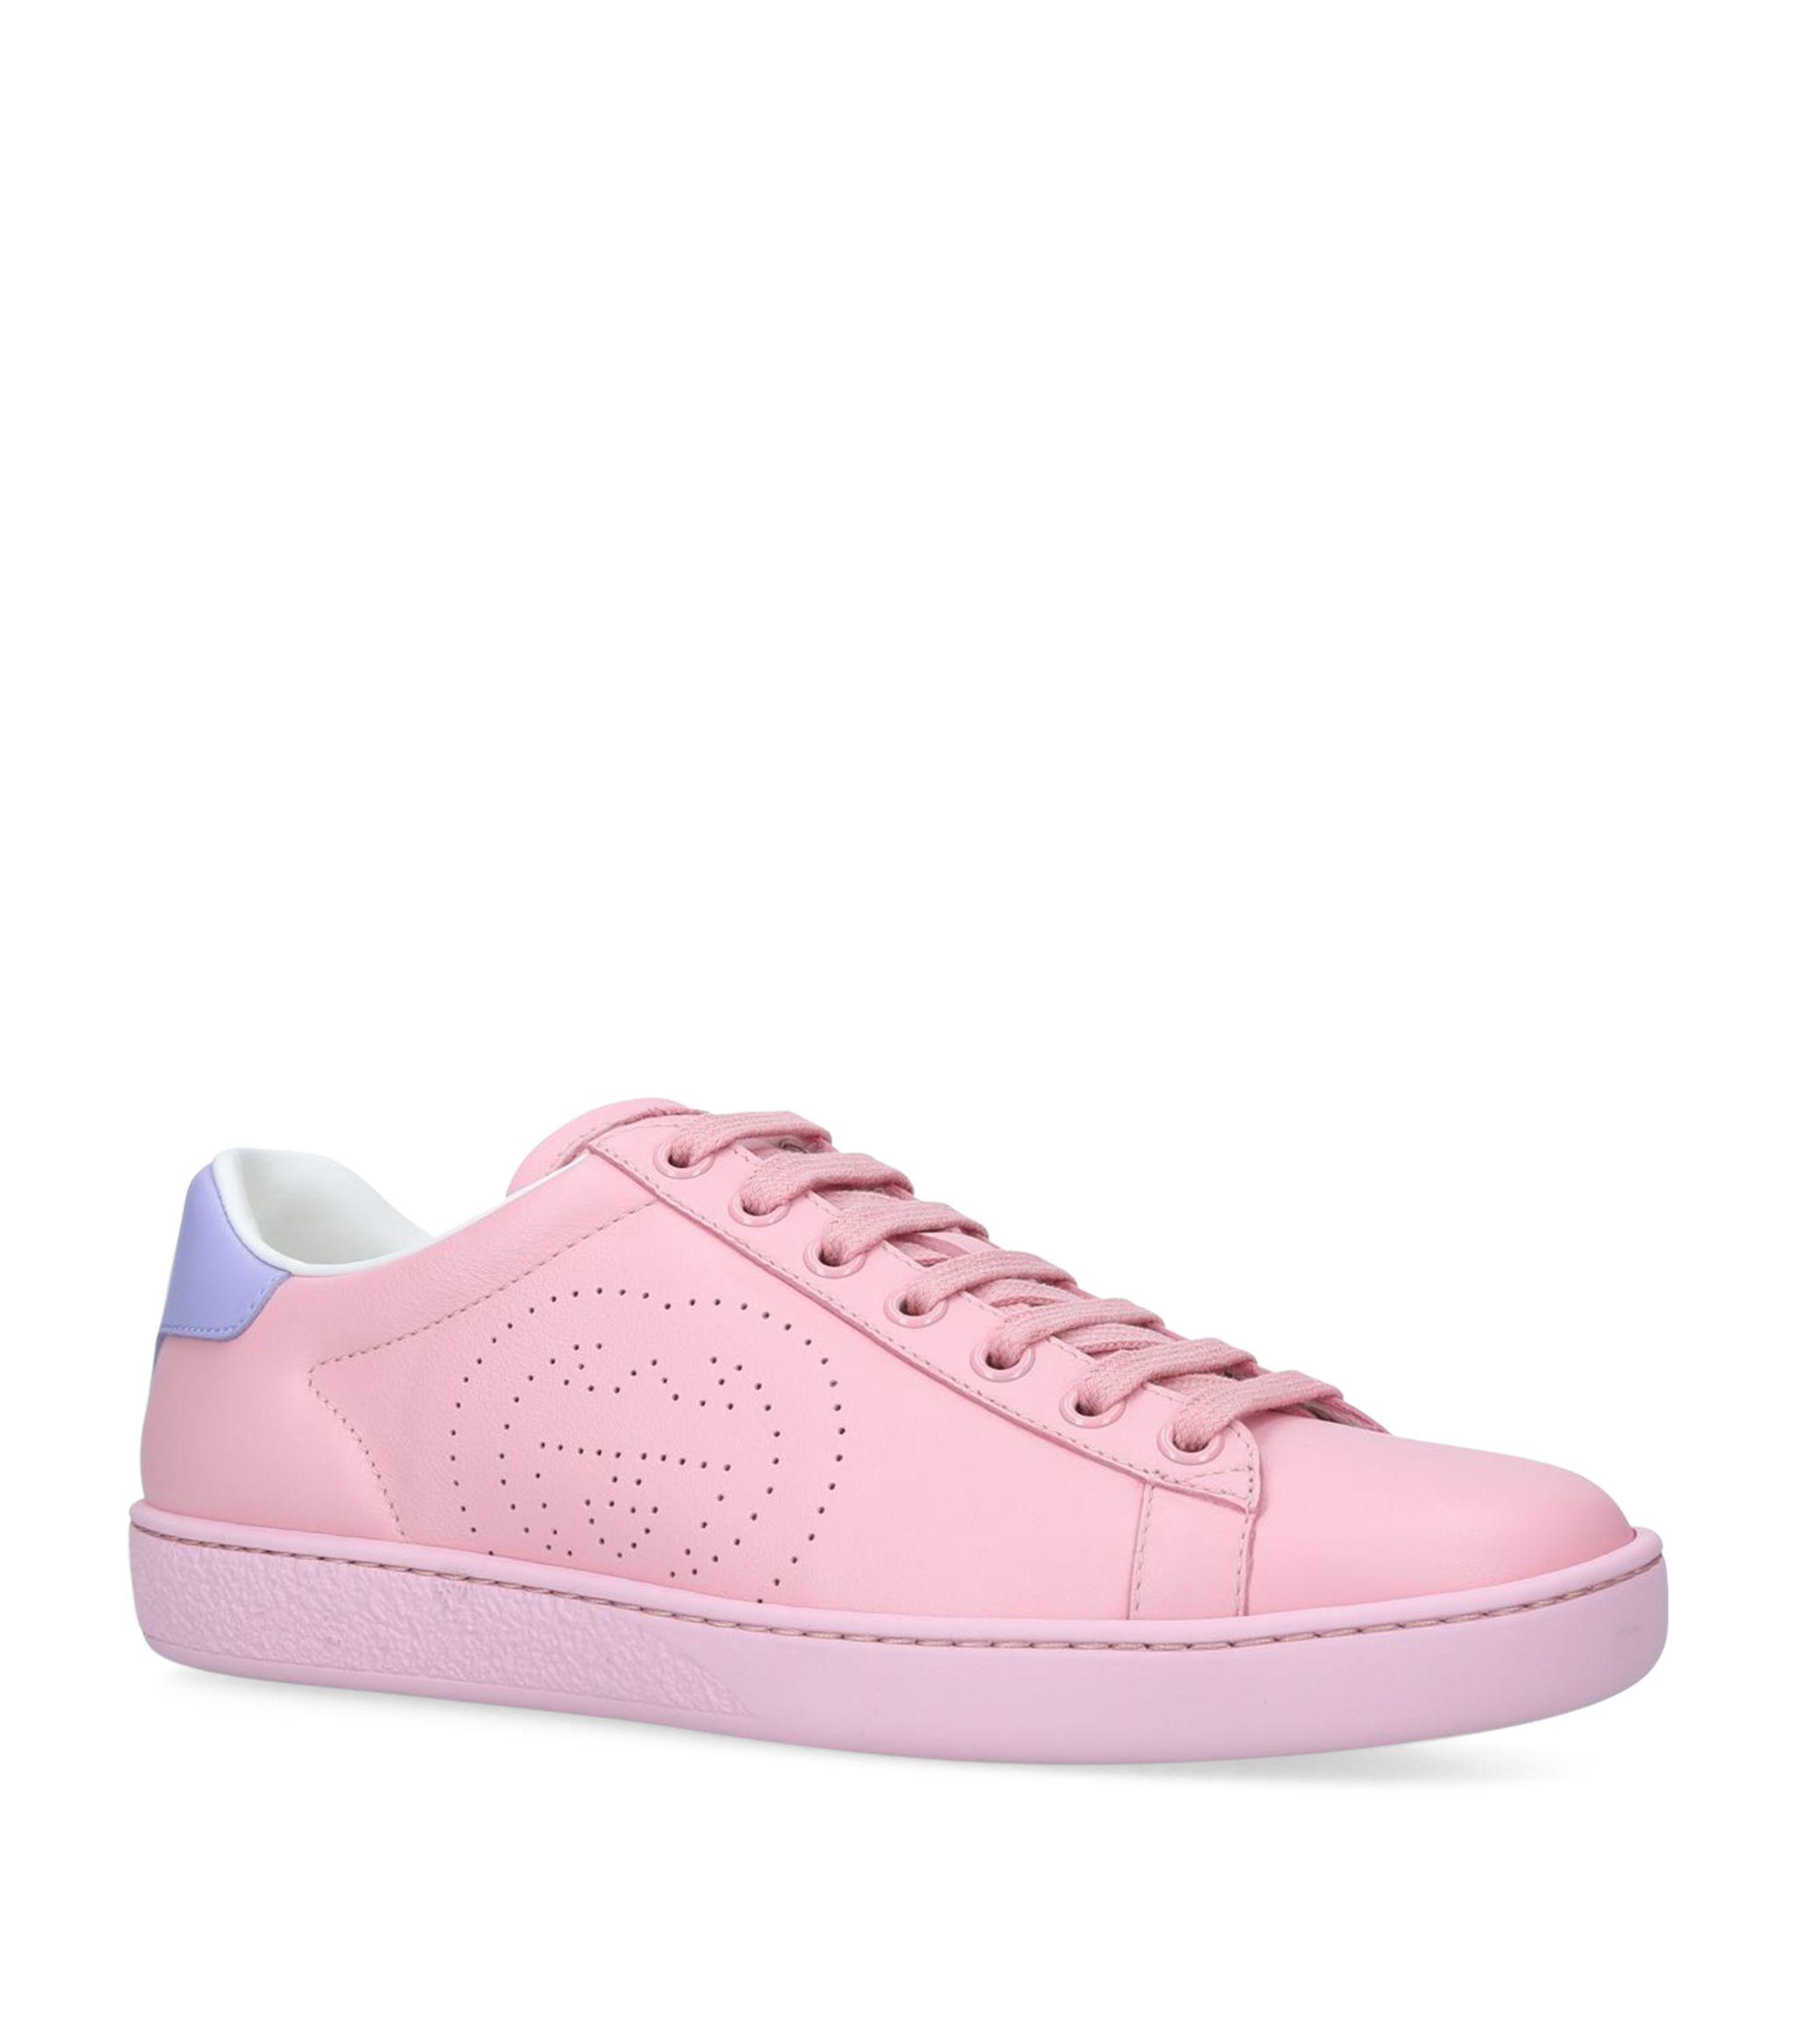 Ace Perforated Leather Trainers in Pink 